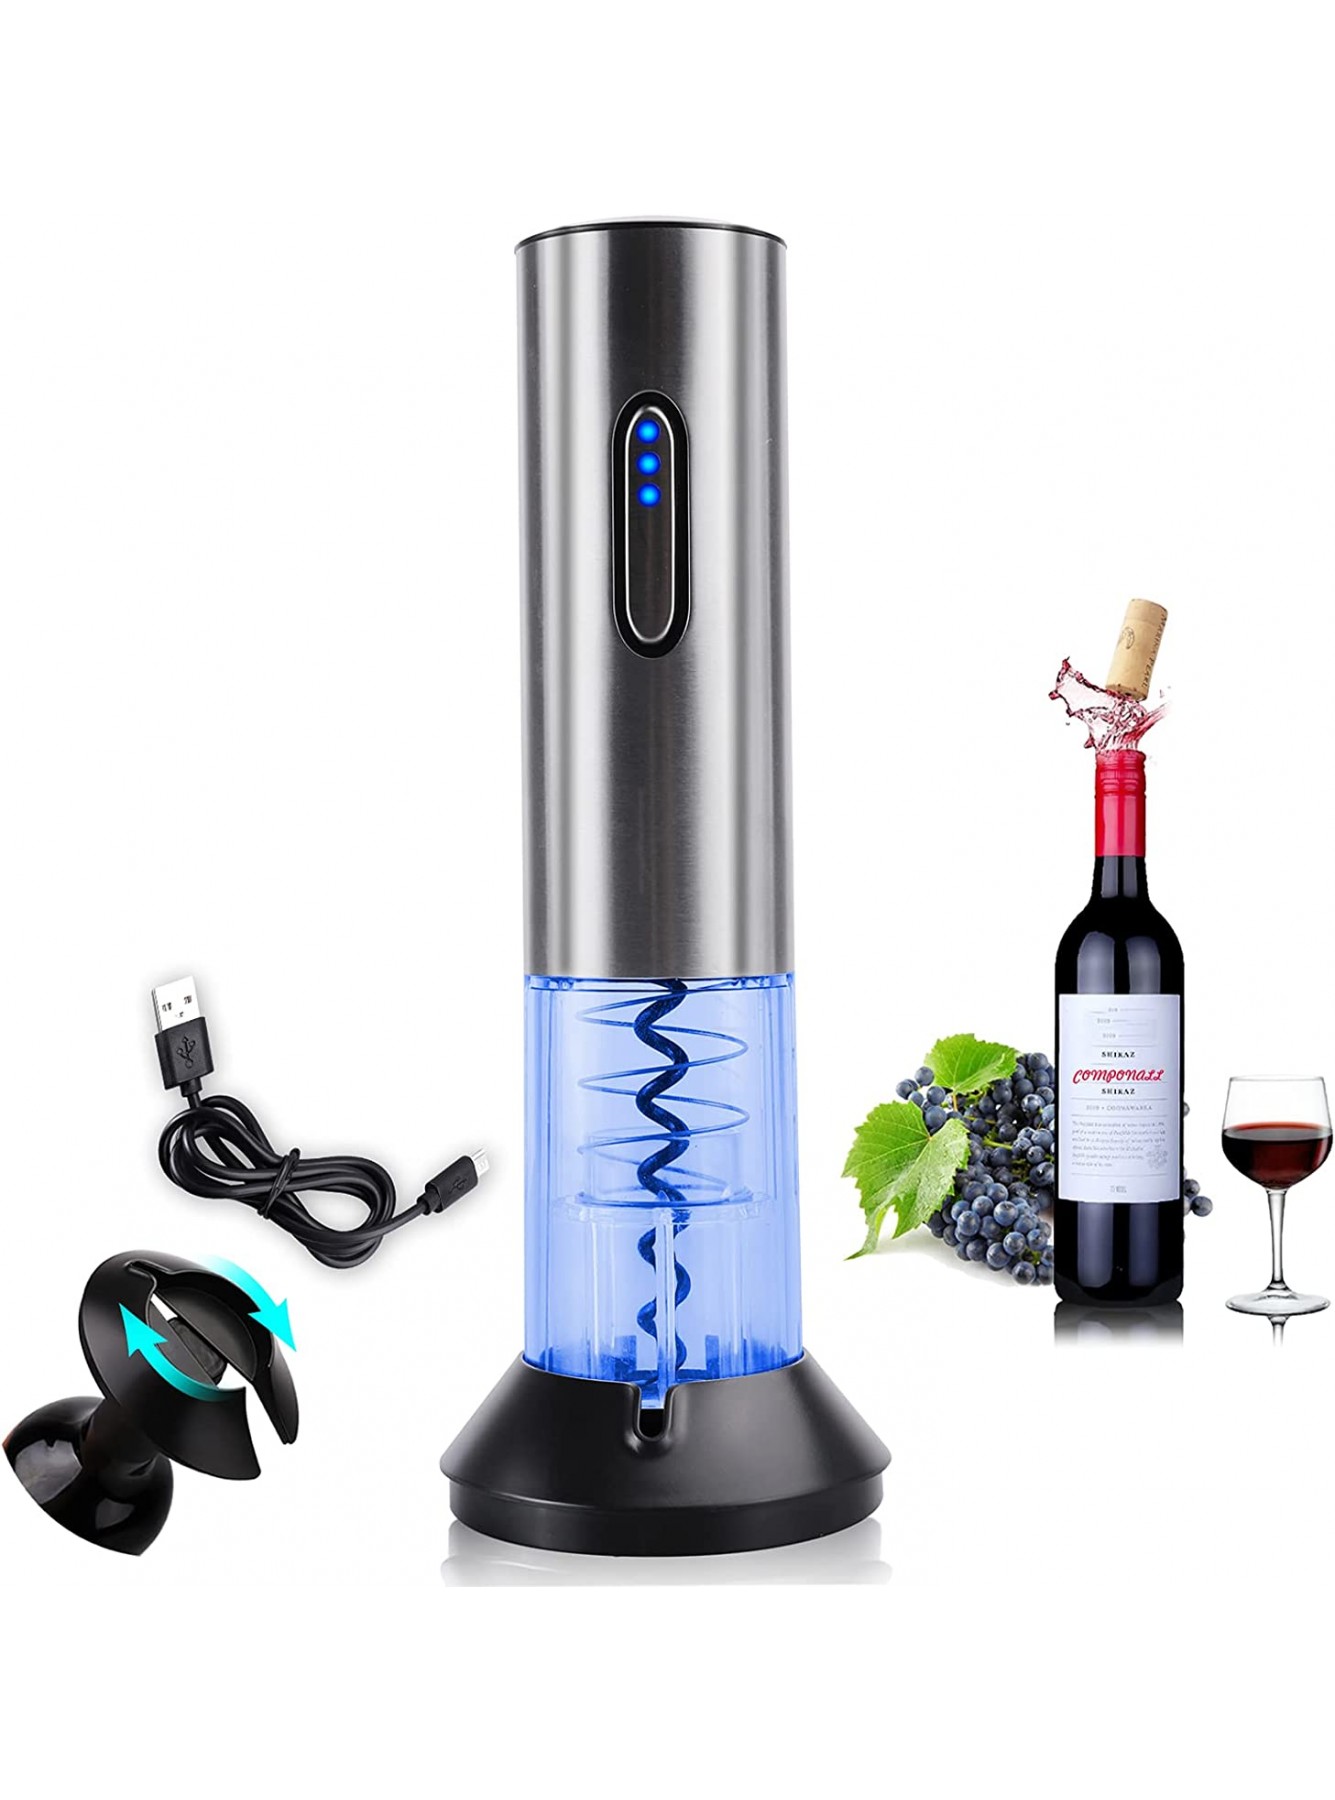 COMPONALL Electric Wine Opener Automatic Electric Corkscrew USB Rechargeable Cordless Wine Bottle Opener with Foil Cutter SliverC B07SD3L7QC